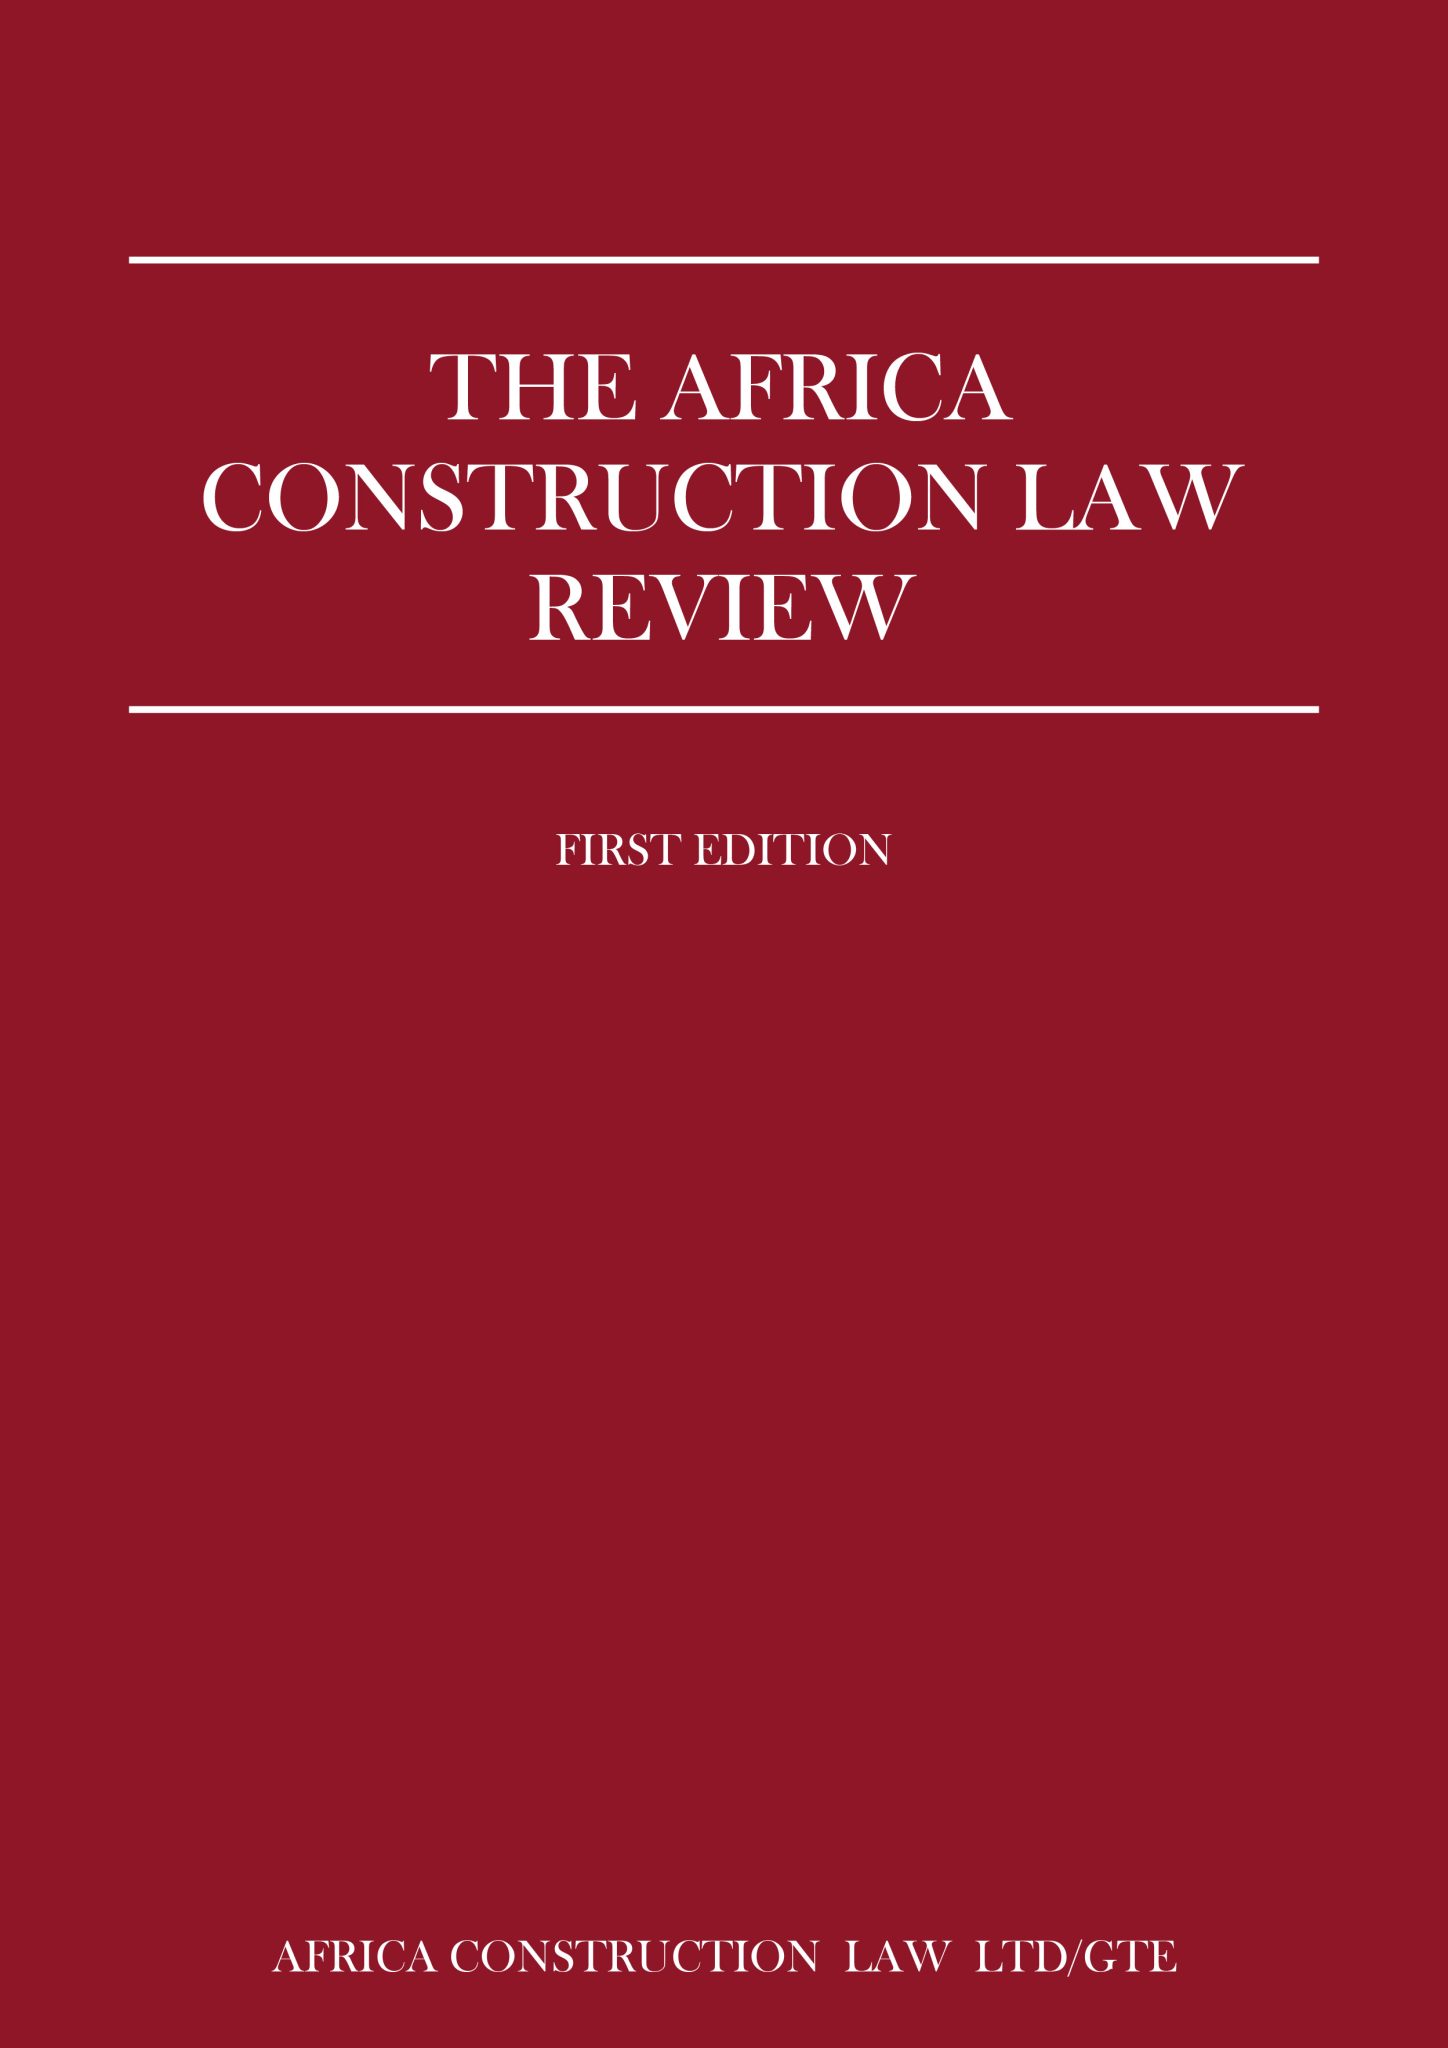 The Africa Construction Law – Kenya chapter